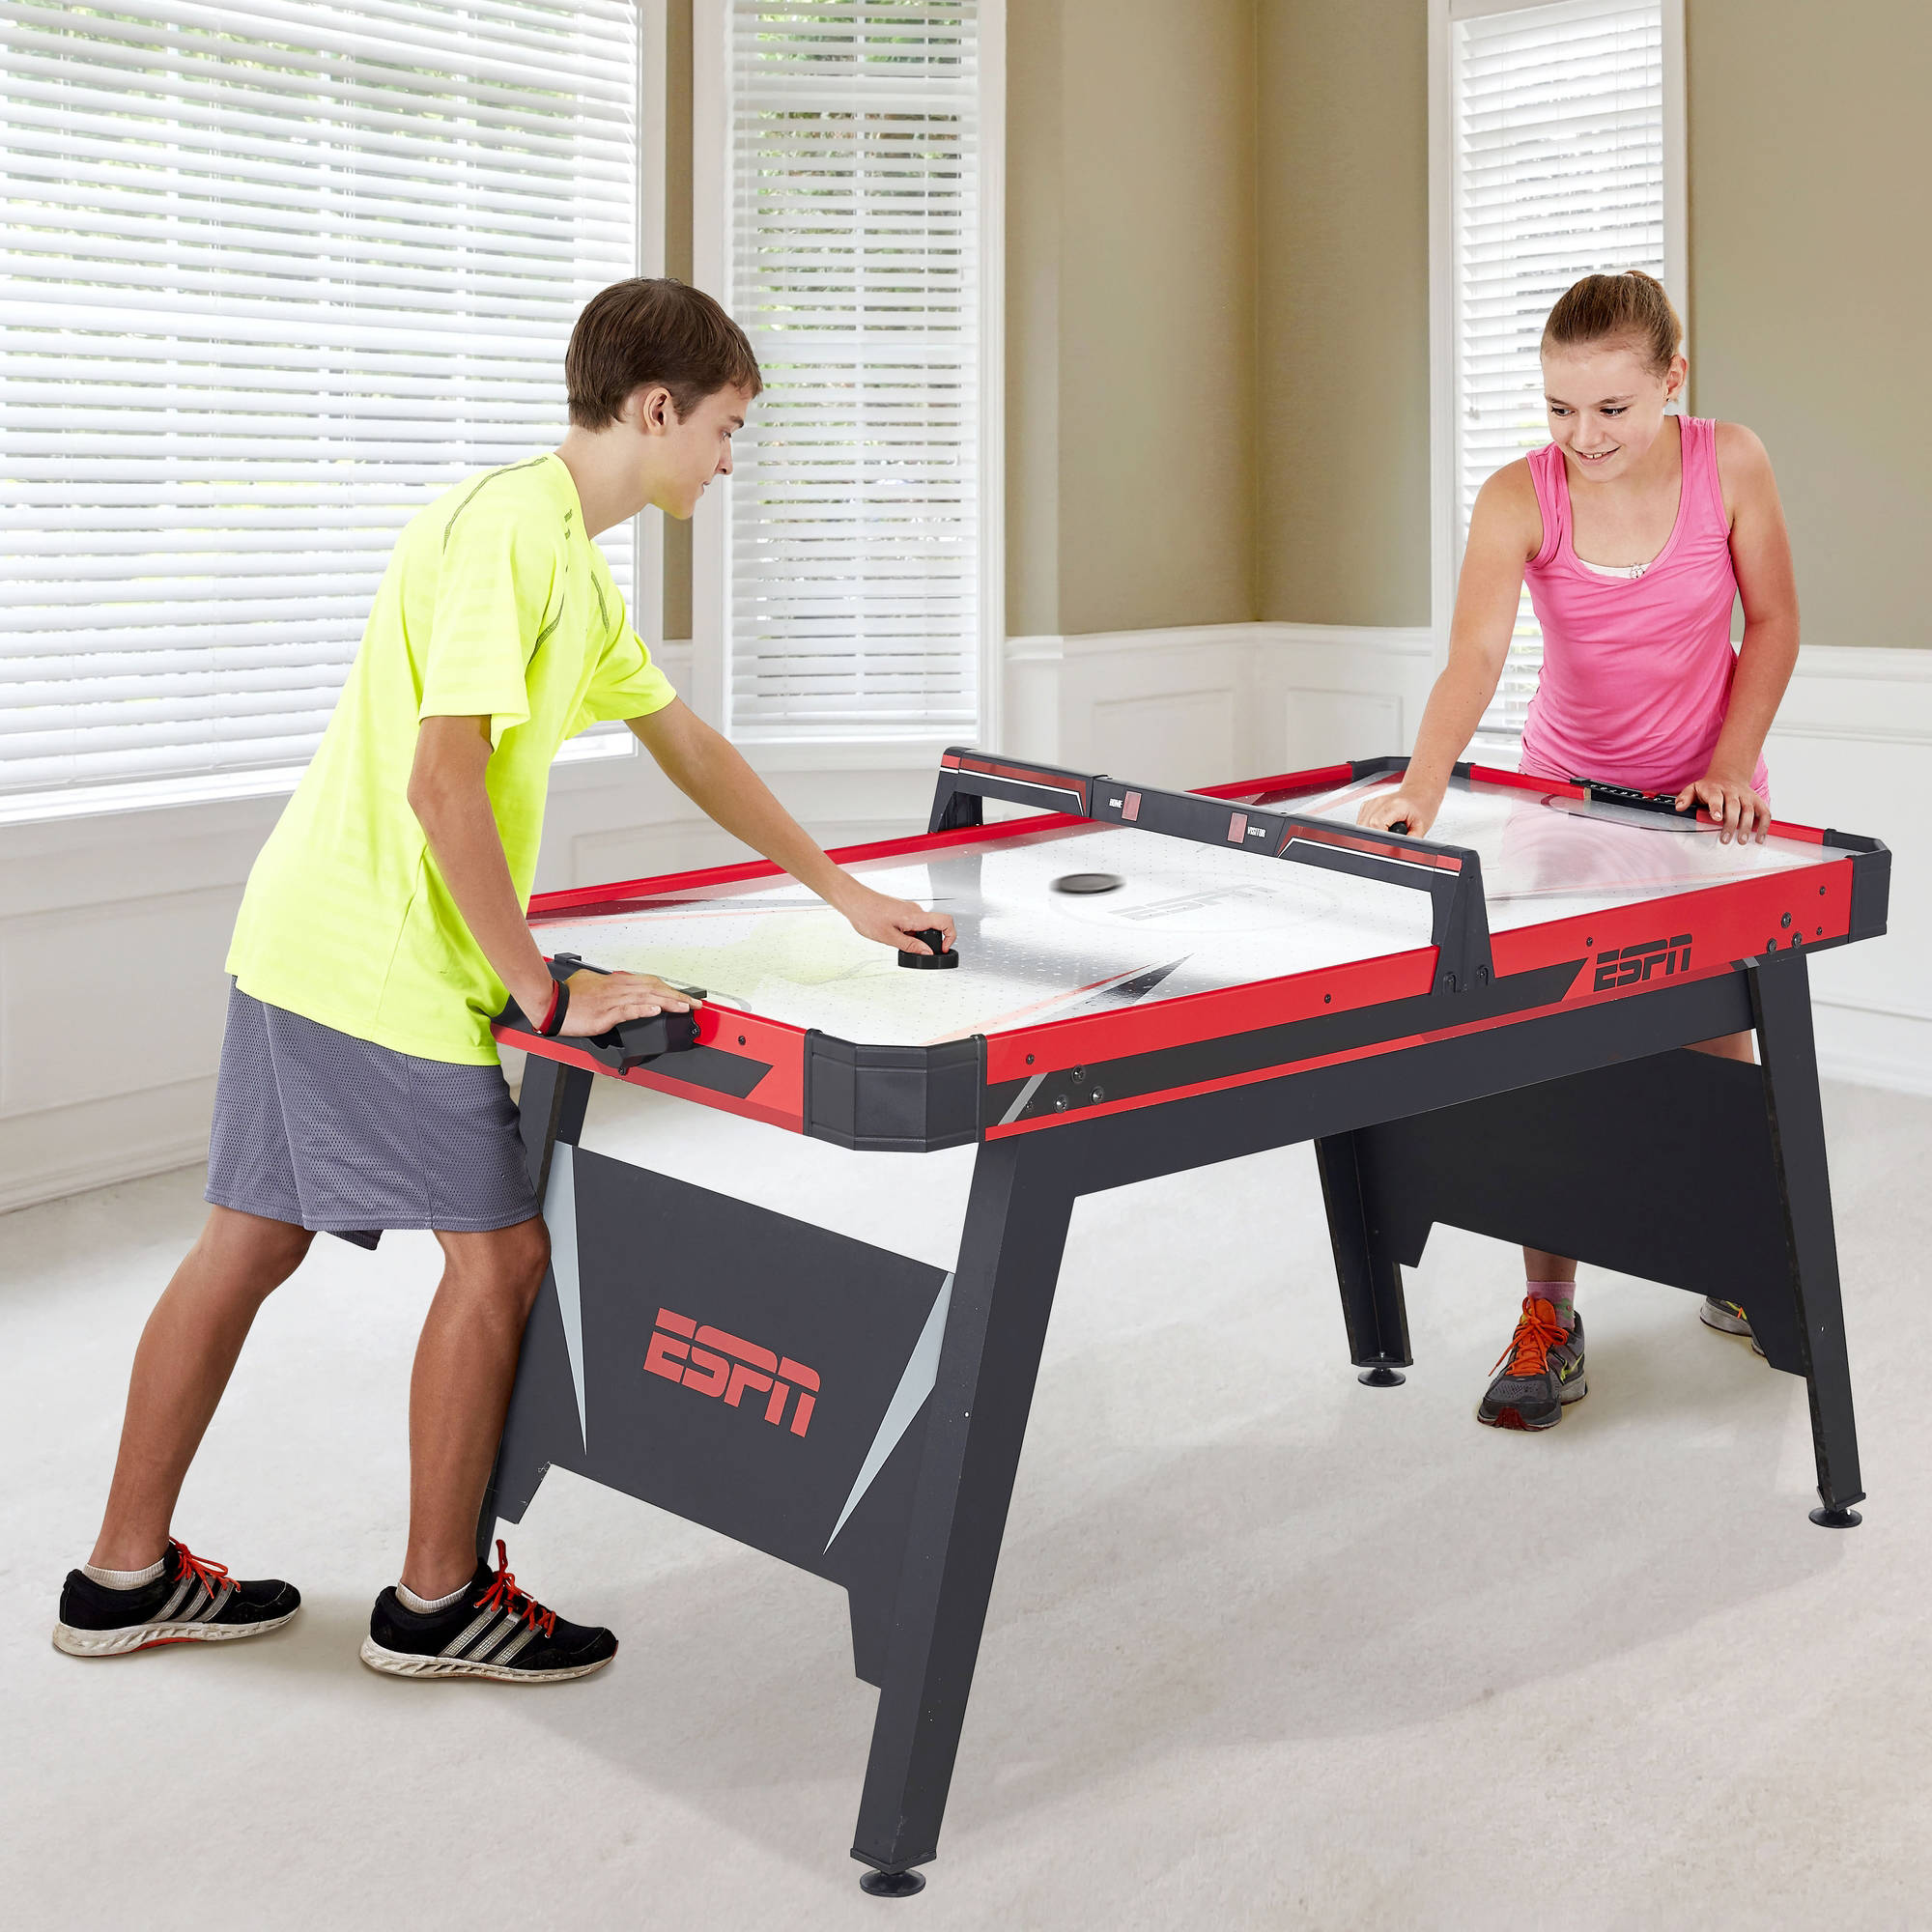 ESPN 60" Air Powered Hockey Table with Overhead Electronic Scorer, Accessories Included, Black/Red - image 2 of 8